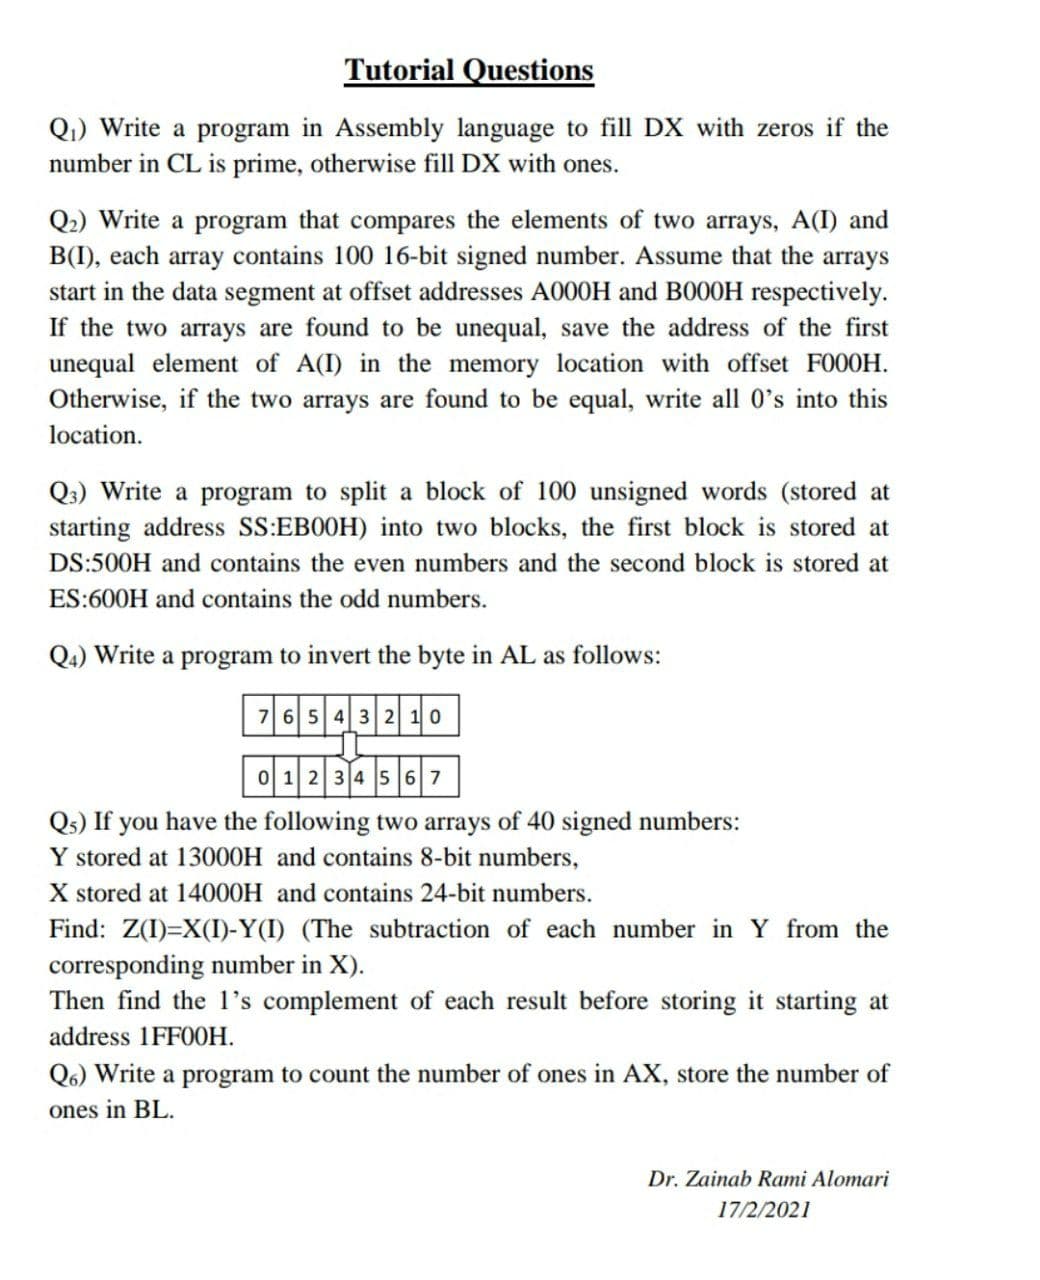 Tutorial Questions
Q1) Write a program in Assembly language to fill DX with zeros if the
number in CL is prime, otherwise fill DX with ones.
Q2) Write a program that compares the elements of two arrays, A(I) and
B(I), each array contains 100 16-bit signed number. Assume that the arrays
start in the data segment at offset addresses A000H and B000H respectively.
If the two arrays are found to be unequal, save the address of the first
unequal element of A(I) in the memory location with offset FO00H.
Otherwise, if the two arrays are found to be equal, write all 0's into this
location.
Q3) Write a program to split a block of 100 unsigned words (stored at
starting address SS:EB0OH) into two blocks, the first block is stored at
DS:500H and contains the even numbers and the second block is stored at
ES:600H and contains the odd numbers.
Q4) Write a program to invert the byte in AL as follows:
76 5 4 3 2 10
0 1 2 34 5 67
Qs) If you have the following two arrays of 40 signed numbers:
Y stored at 13000H and contains 8-bit numbers,
X stored at 14000H and contains 24-bit numbers.
Find: Z(I)=X(I)-Y(I) (The subtraction of each number in Y from the
corresponding number in X).
Then find the 1's complement of each result before storing it starting at
address 1FF00H.
Q6) Write a program to count the number of ones in AX, store the number of
ones in BL.
Dr. Zainab Rami Alomari
17/2/2021
